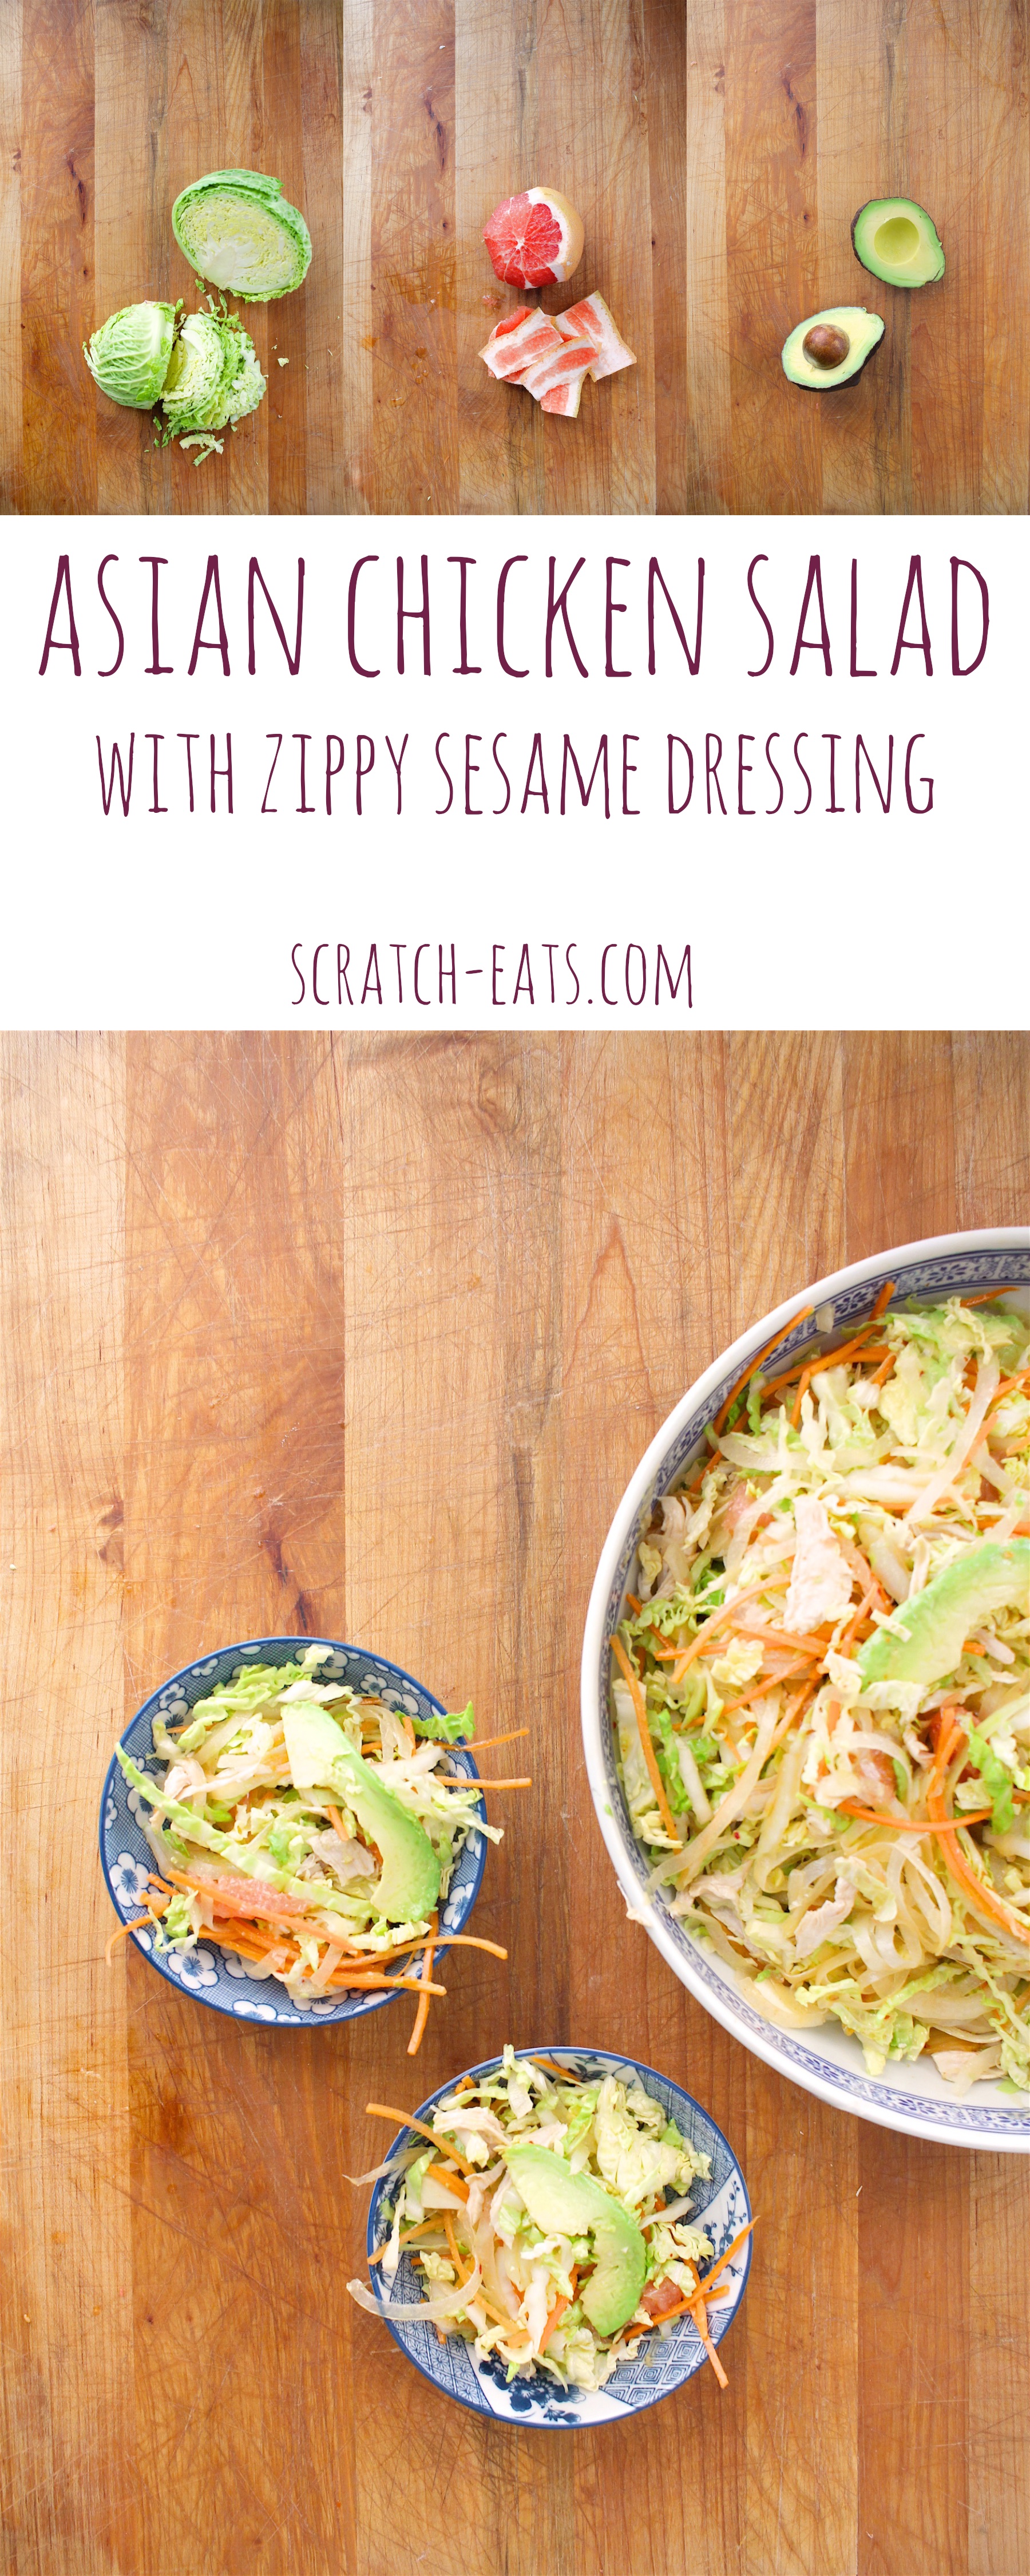 Asian Chicken Salad with Zippy Sesame Dressing